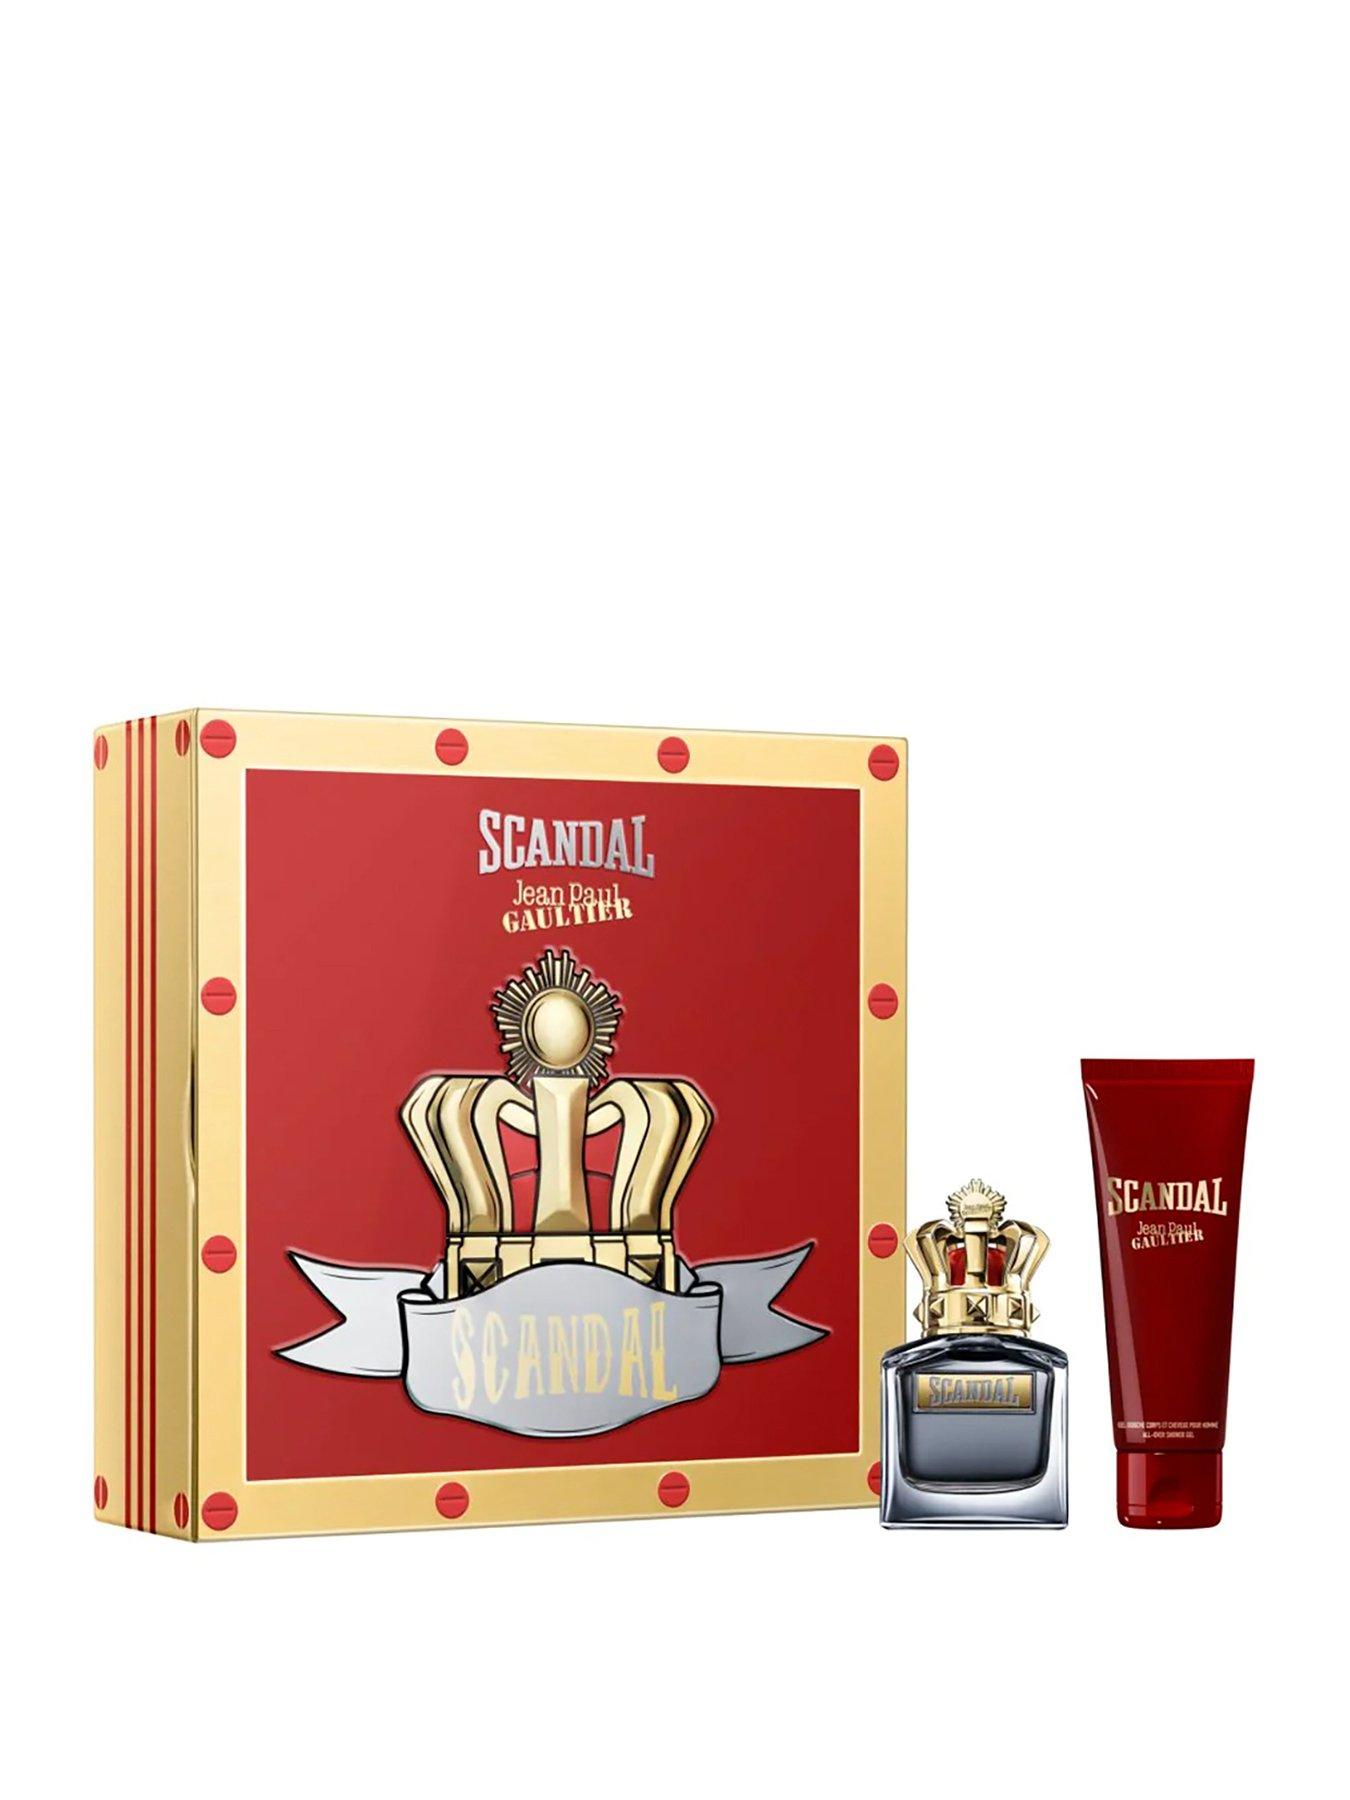 Jean Paul Gaultier Scandal Pour Homme 50ml EDT Gift Set | very.co.uk